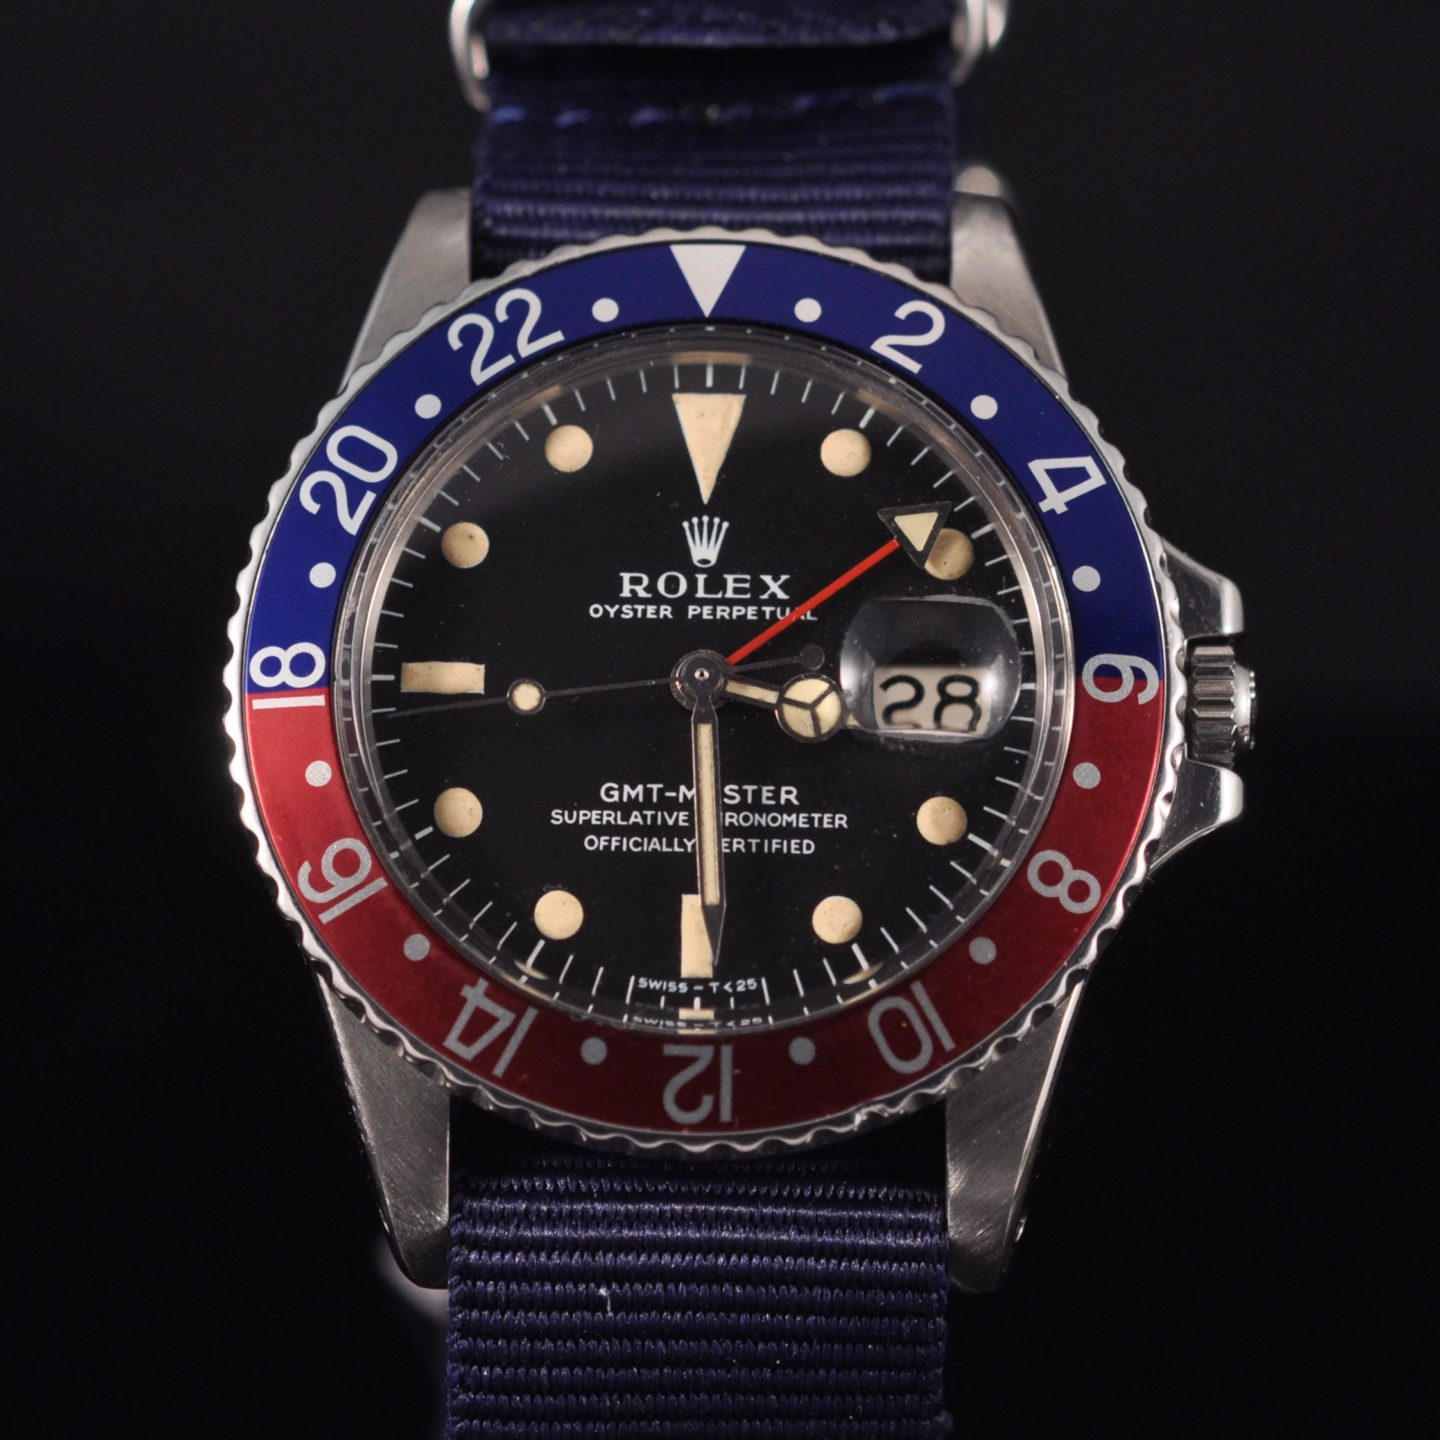 Rolex GMT Master 1675 Long E - Stainless steel, good condition